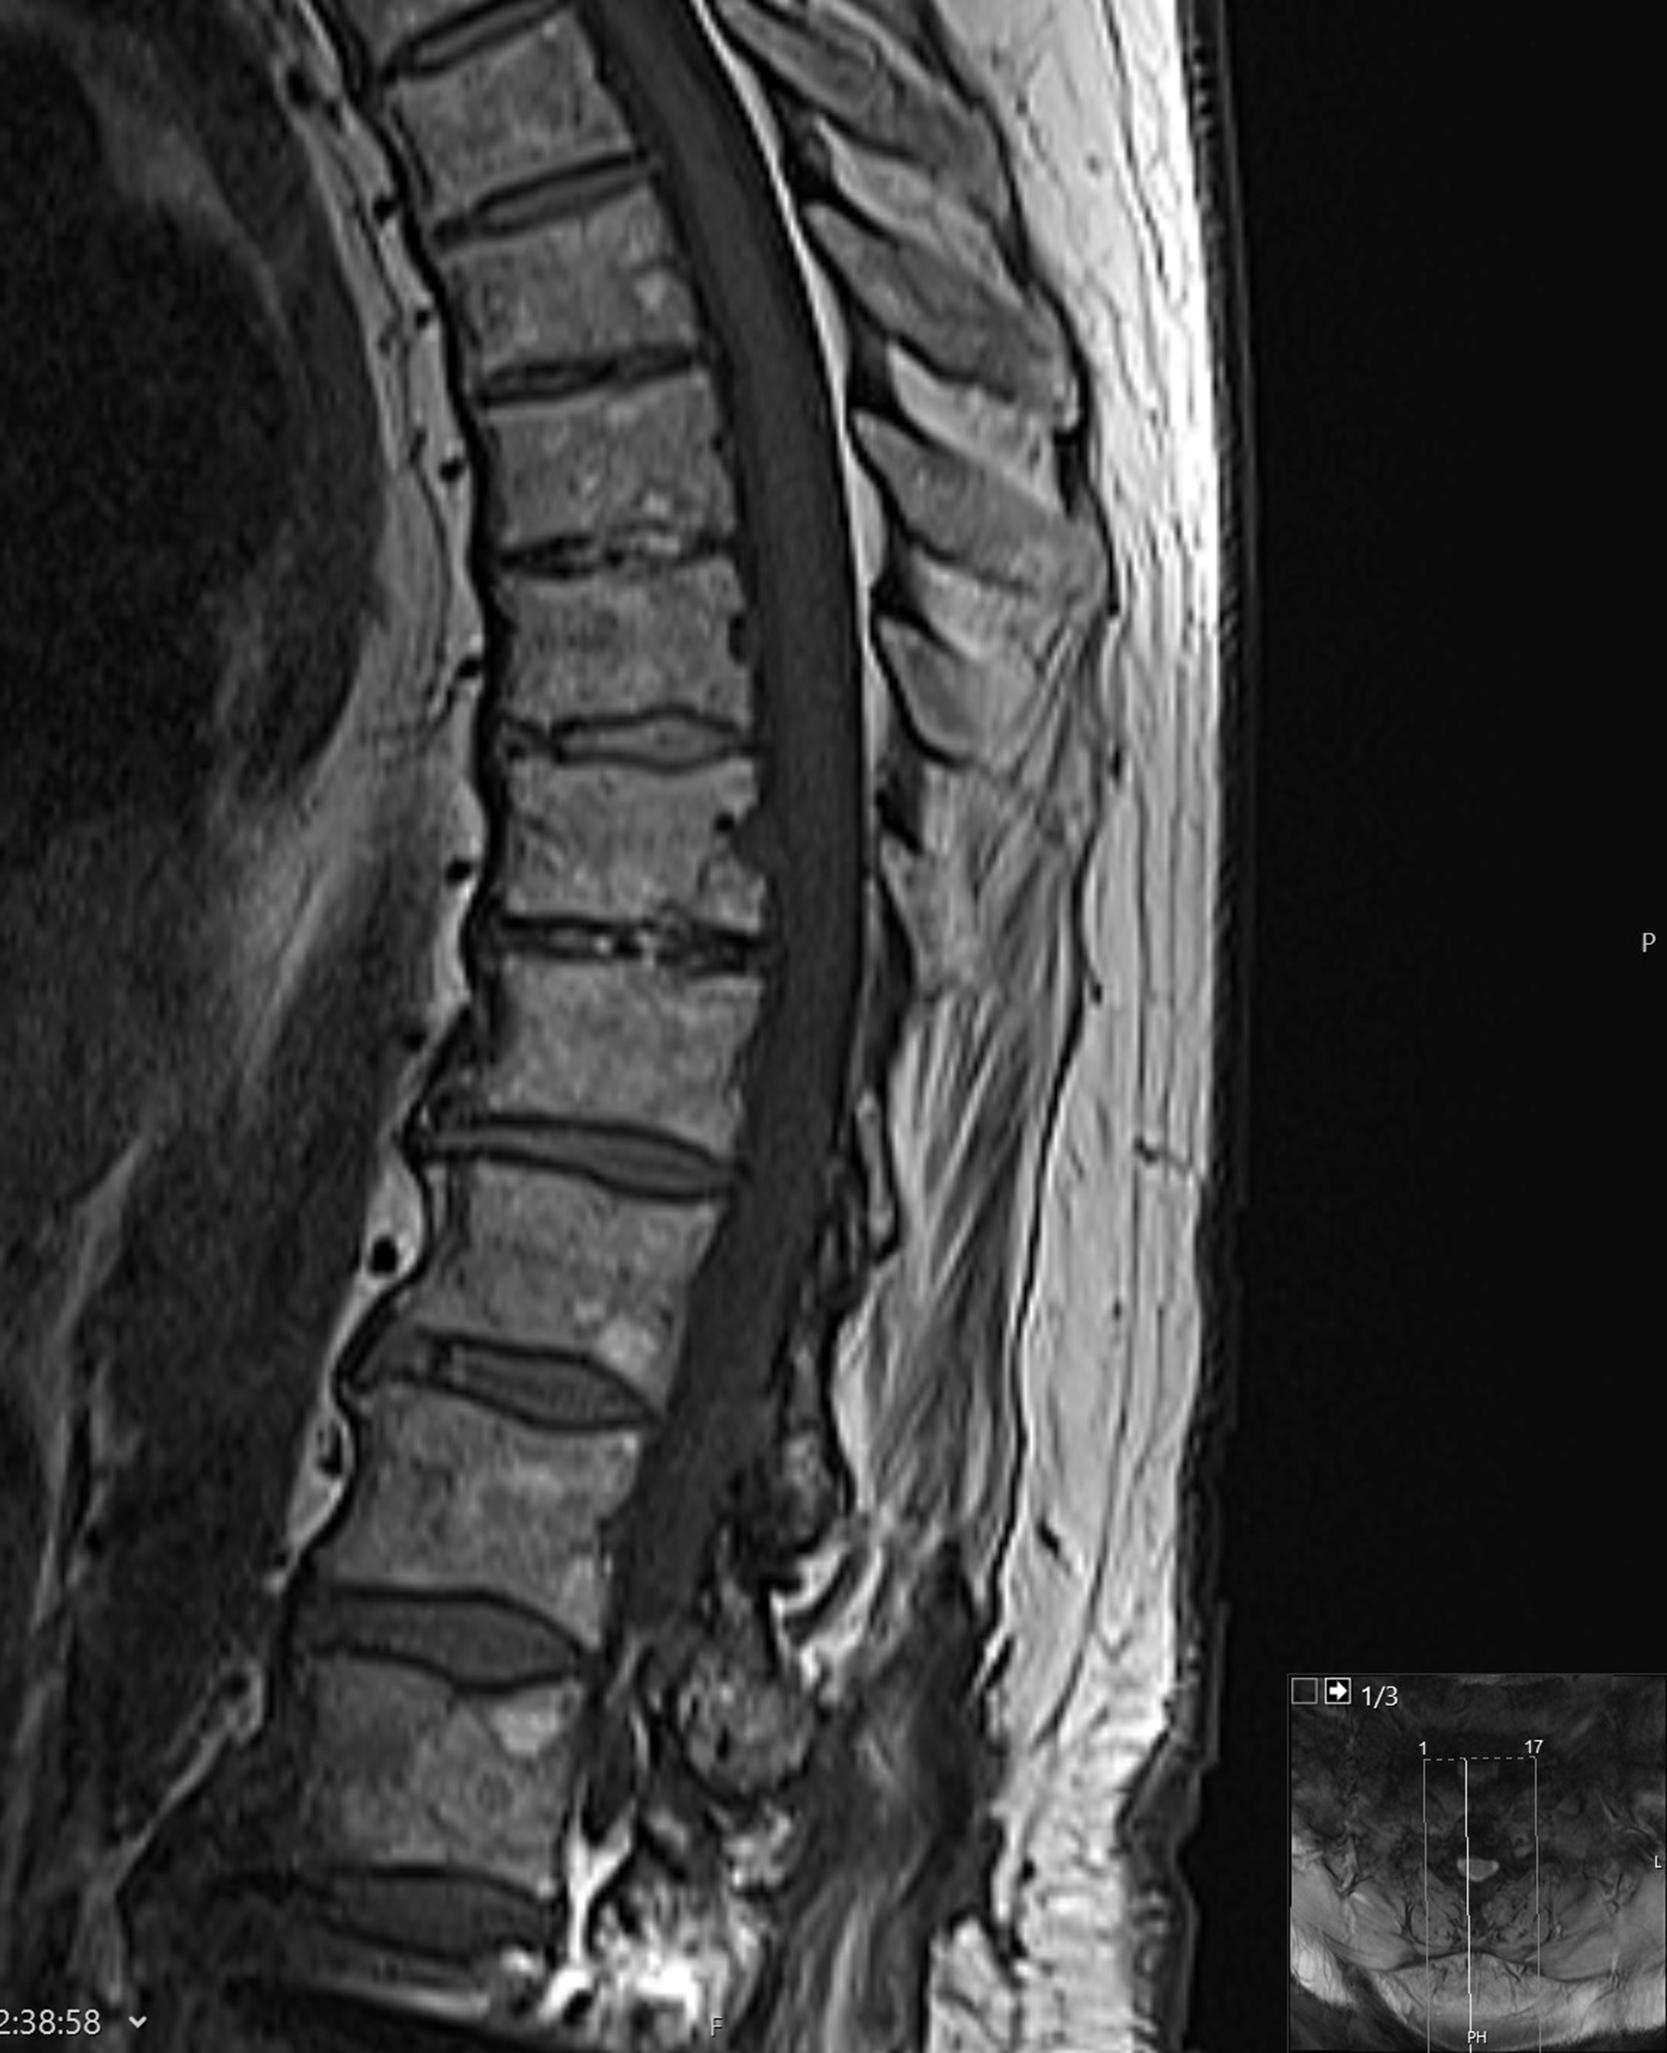 Figure 7.2, Sagittal T1-weighted MRI of the thoracolumbar spine of a 78-year-old patient demonstrating variable degrees of endplate osteophytes and disc dehydration with loss of disc height.